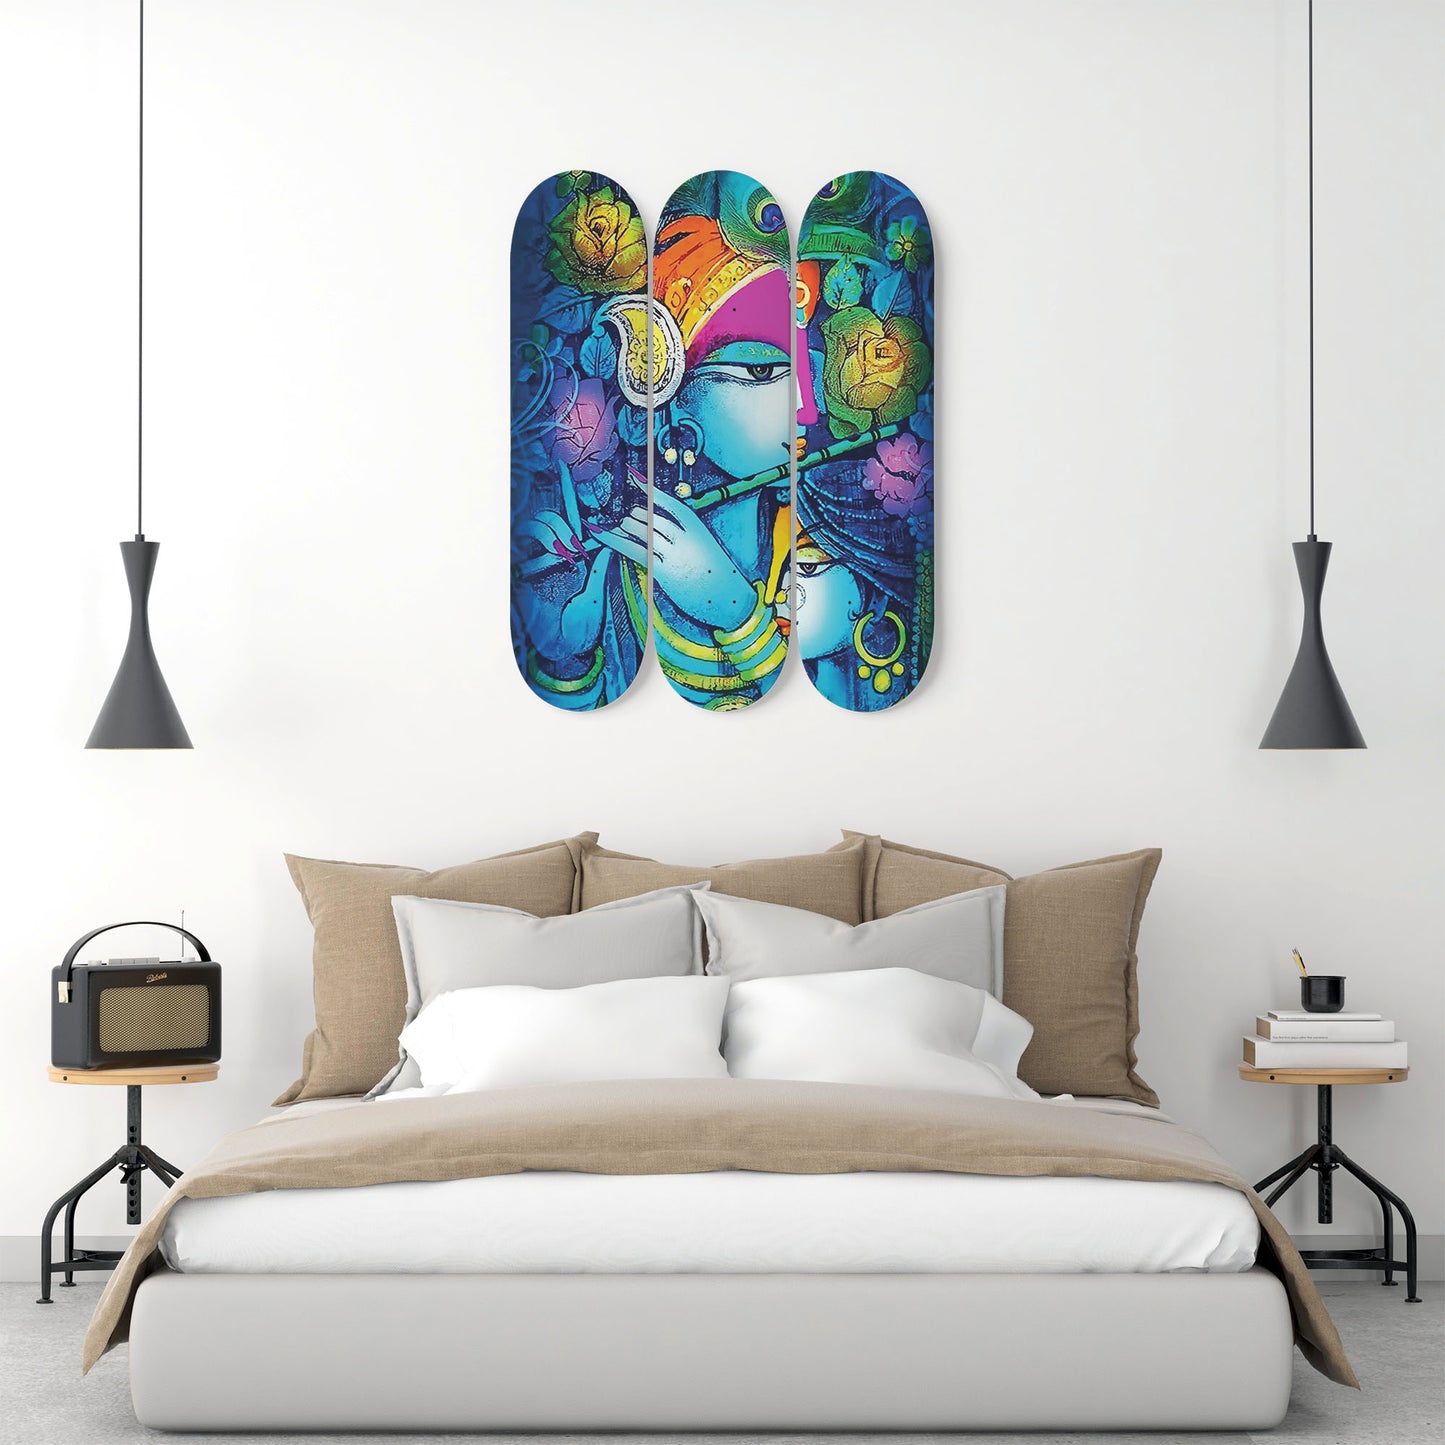 Random Colorful Artwork 20 | Skateboard Deck Wall Art, Wall Hanged Room Decoration, Maple Wood, Accent Gift for Home, Aesthetic Wall Art